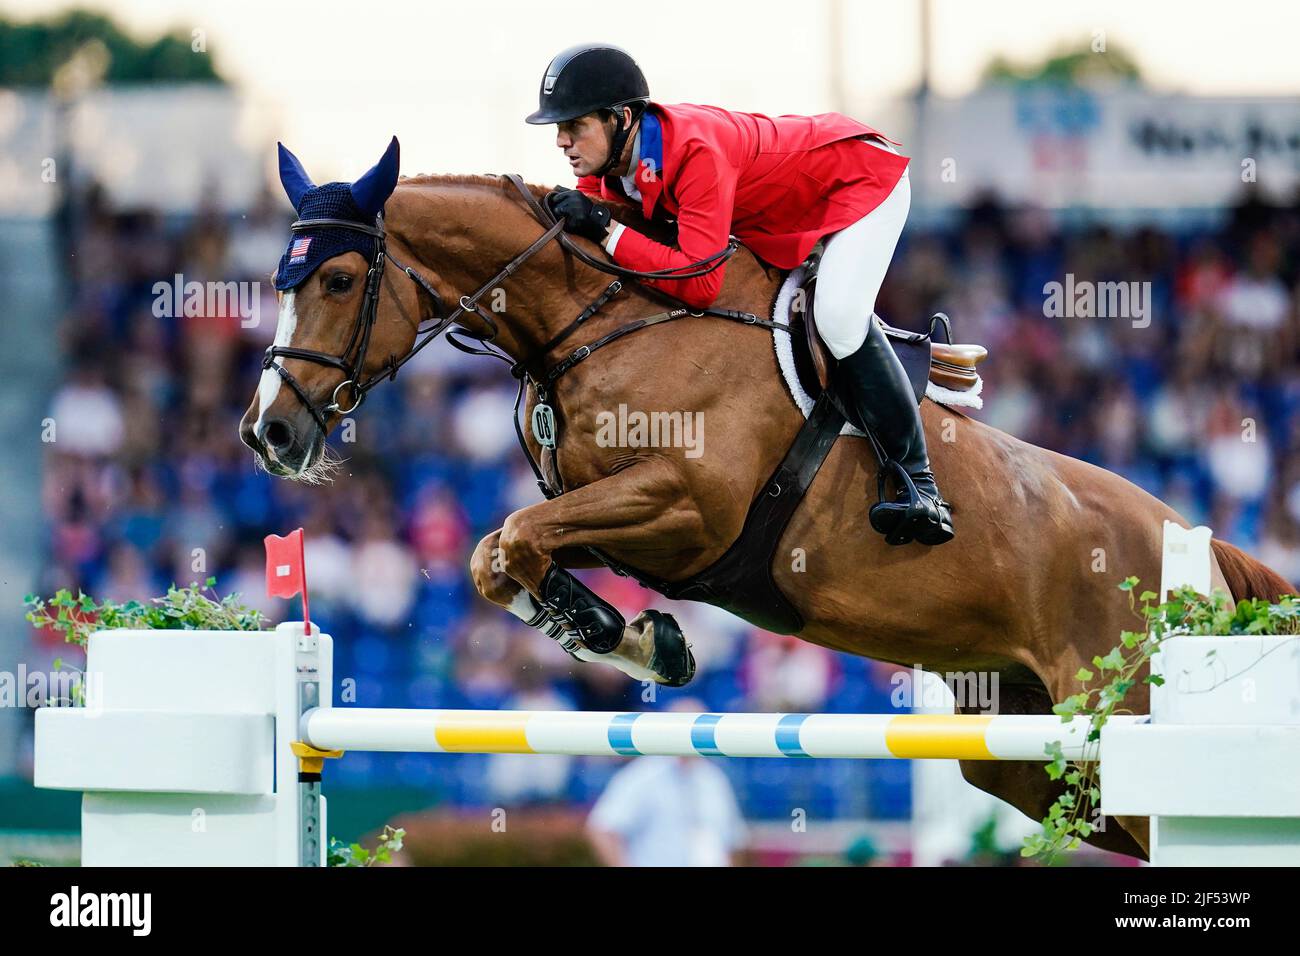 Aachen, Germany. 29th June, 2022. Equestrian sport/jumping CHIO, Prize of Europe